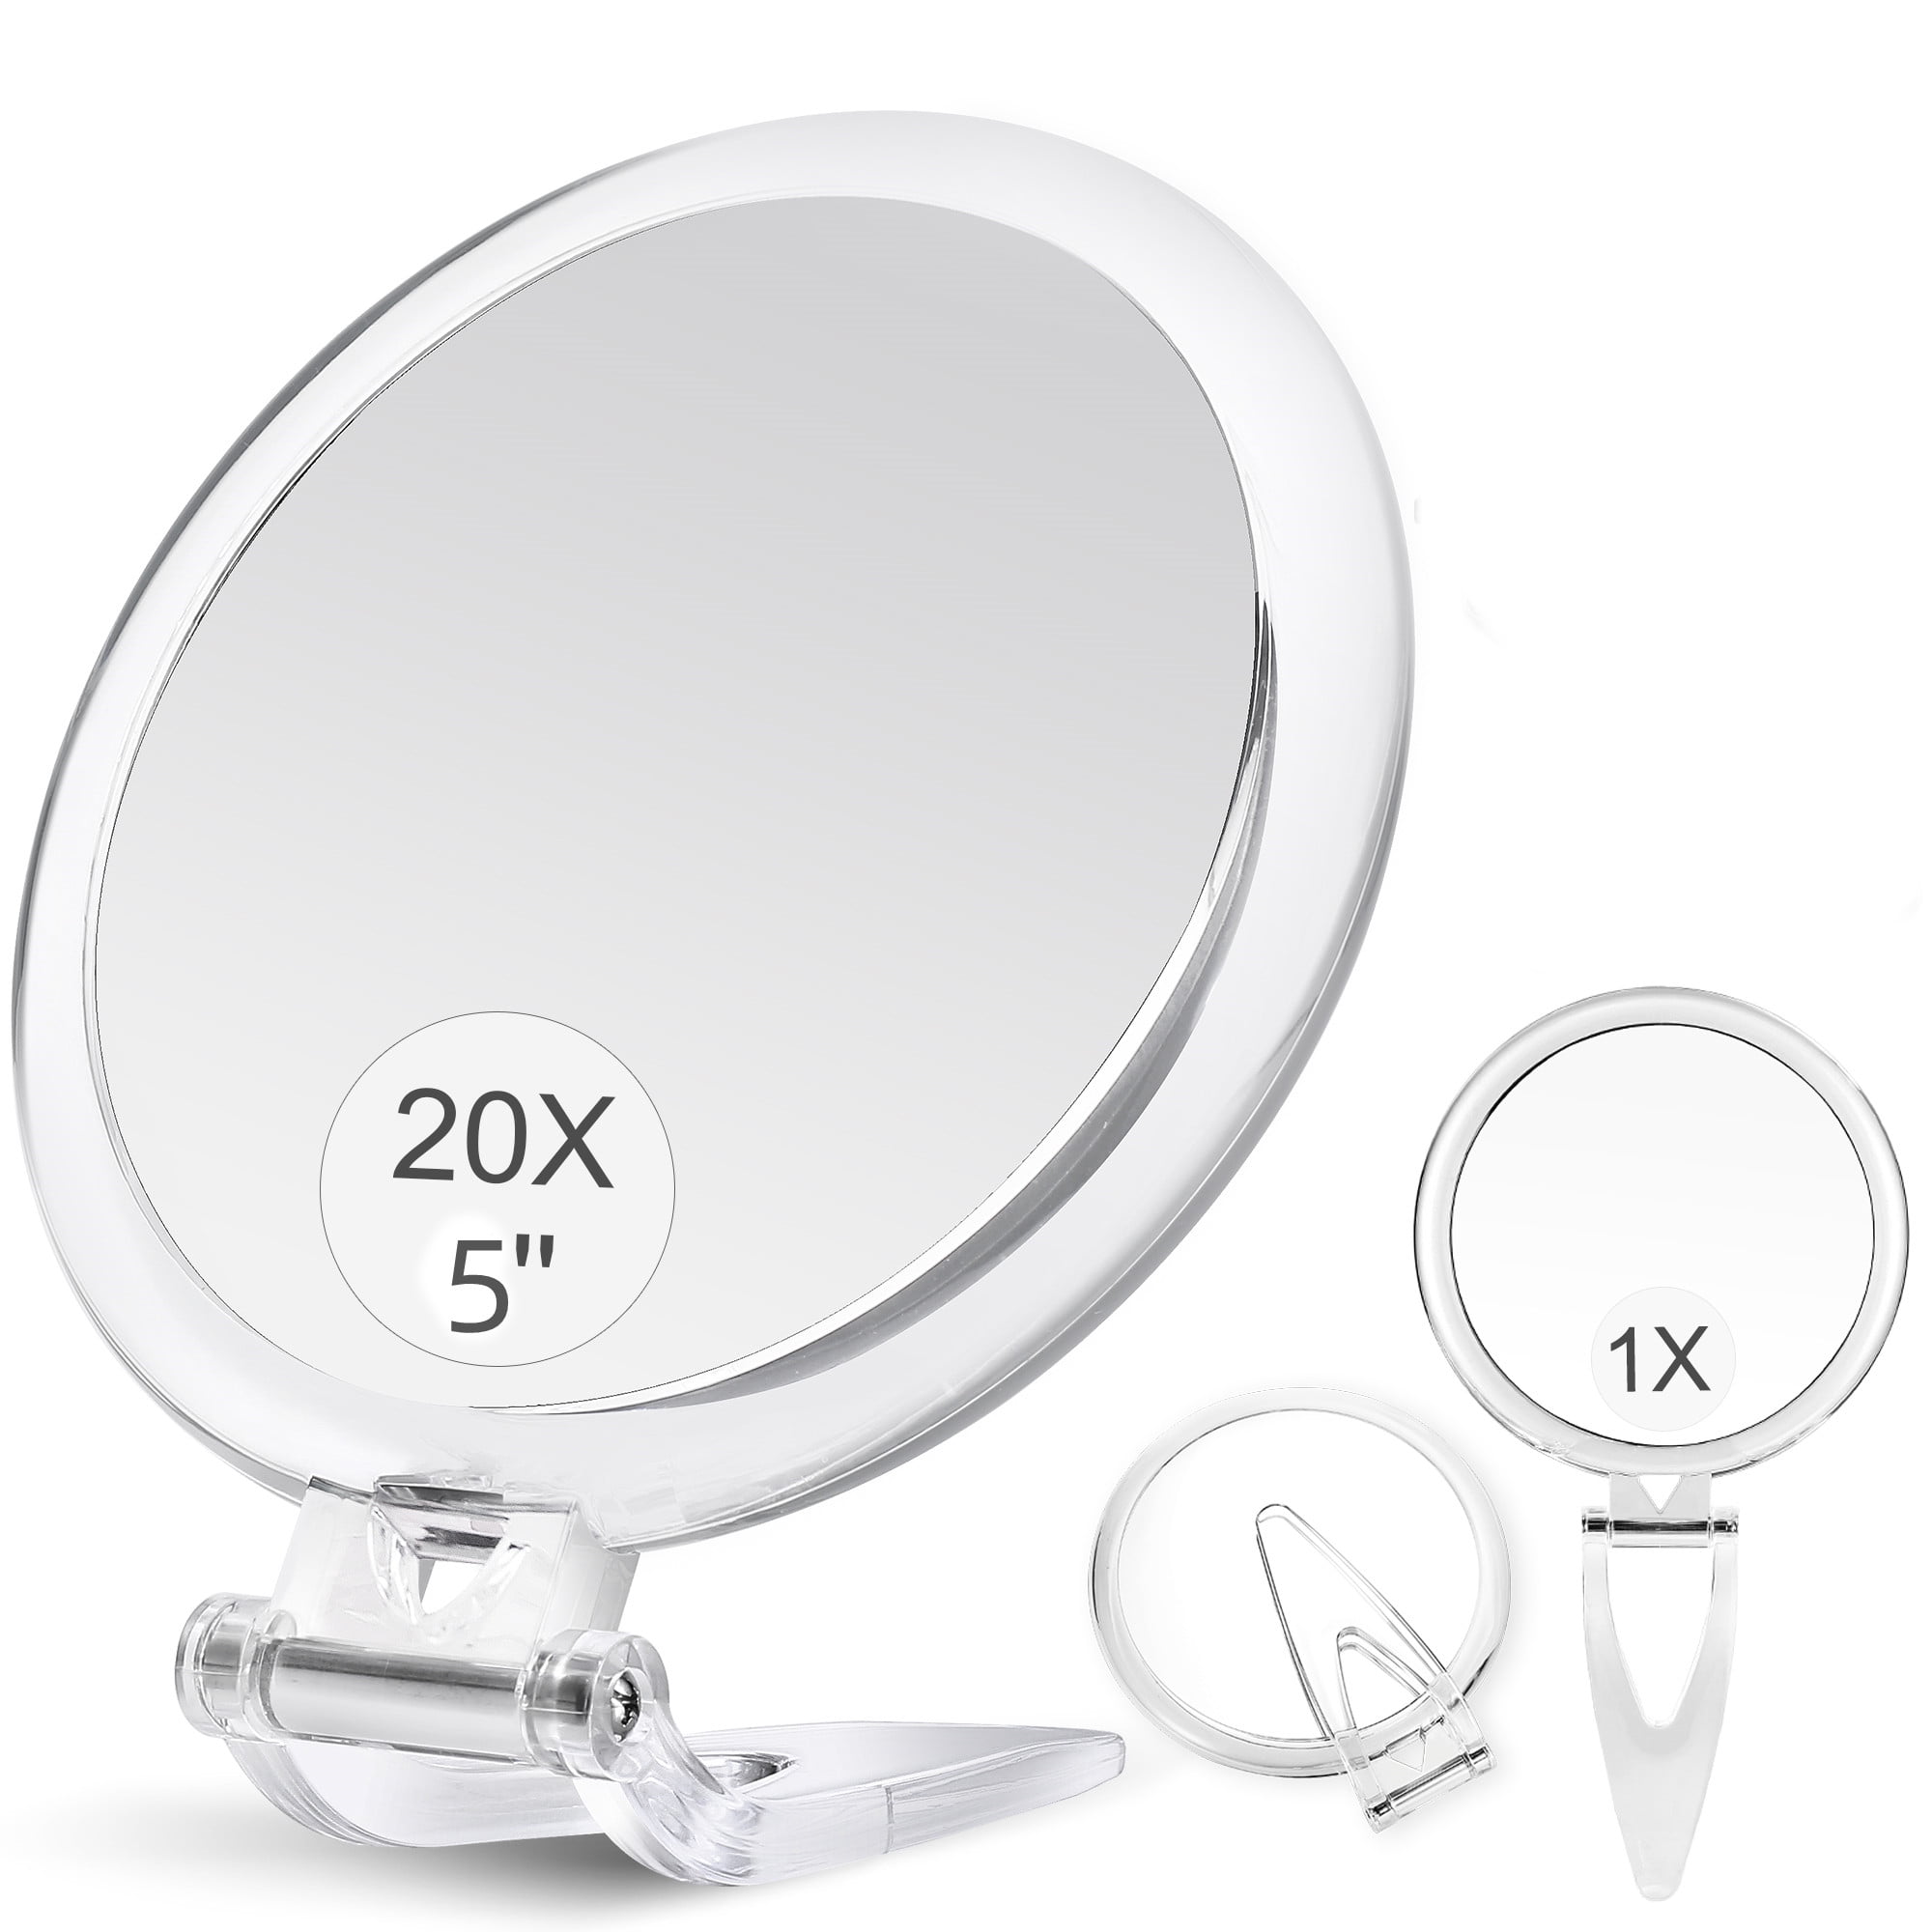 Two Sided Mirror and Blackhead/Blemish Removal Folding Makeup Mirror with Handheld/Stand,Use for Makeup Application Tweezing B Beauty Planet 5Inch,20X Magnifying Mirror 20X/1X Magnification 